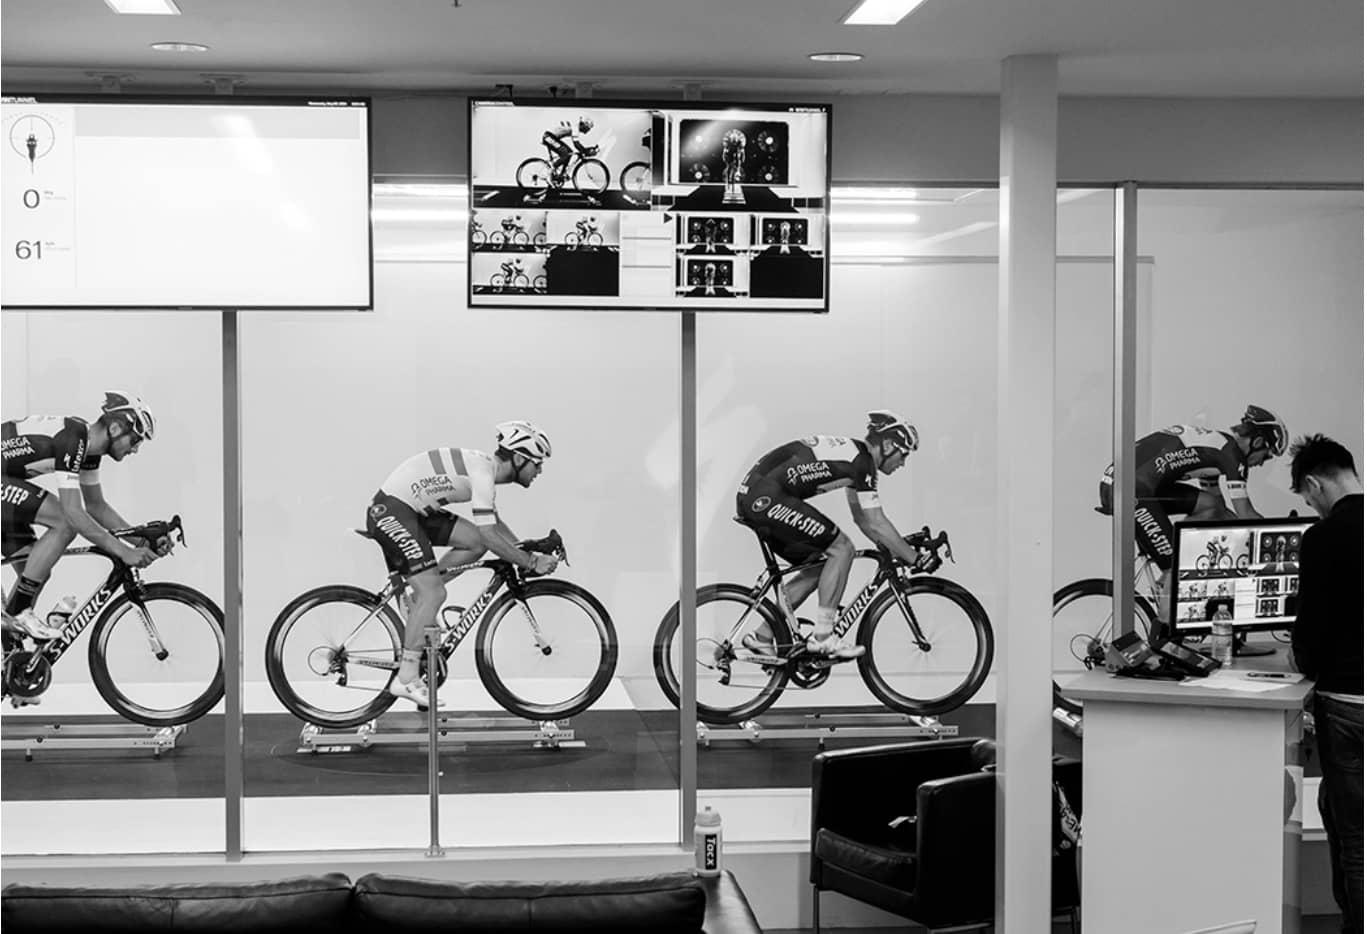 Cyclists in drafting position in the Specialized wind tunnel